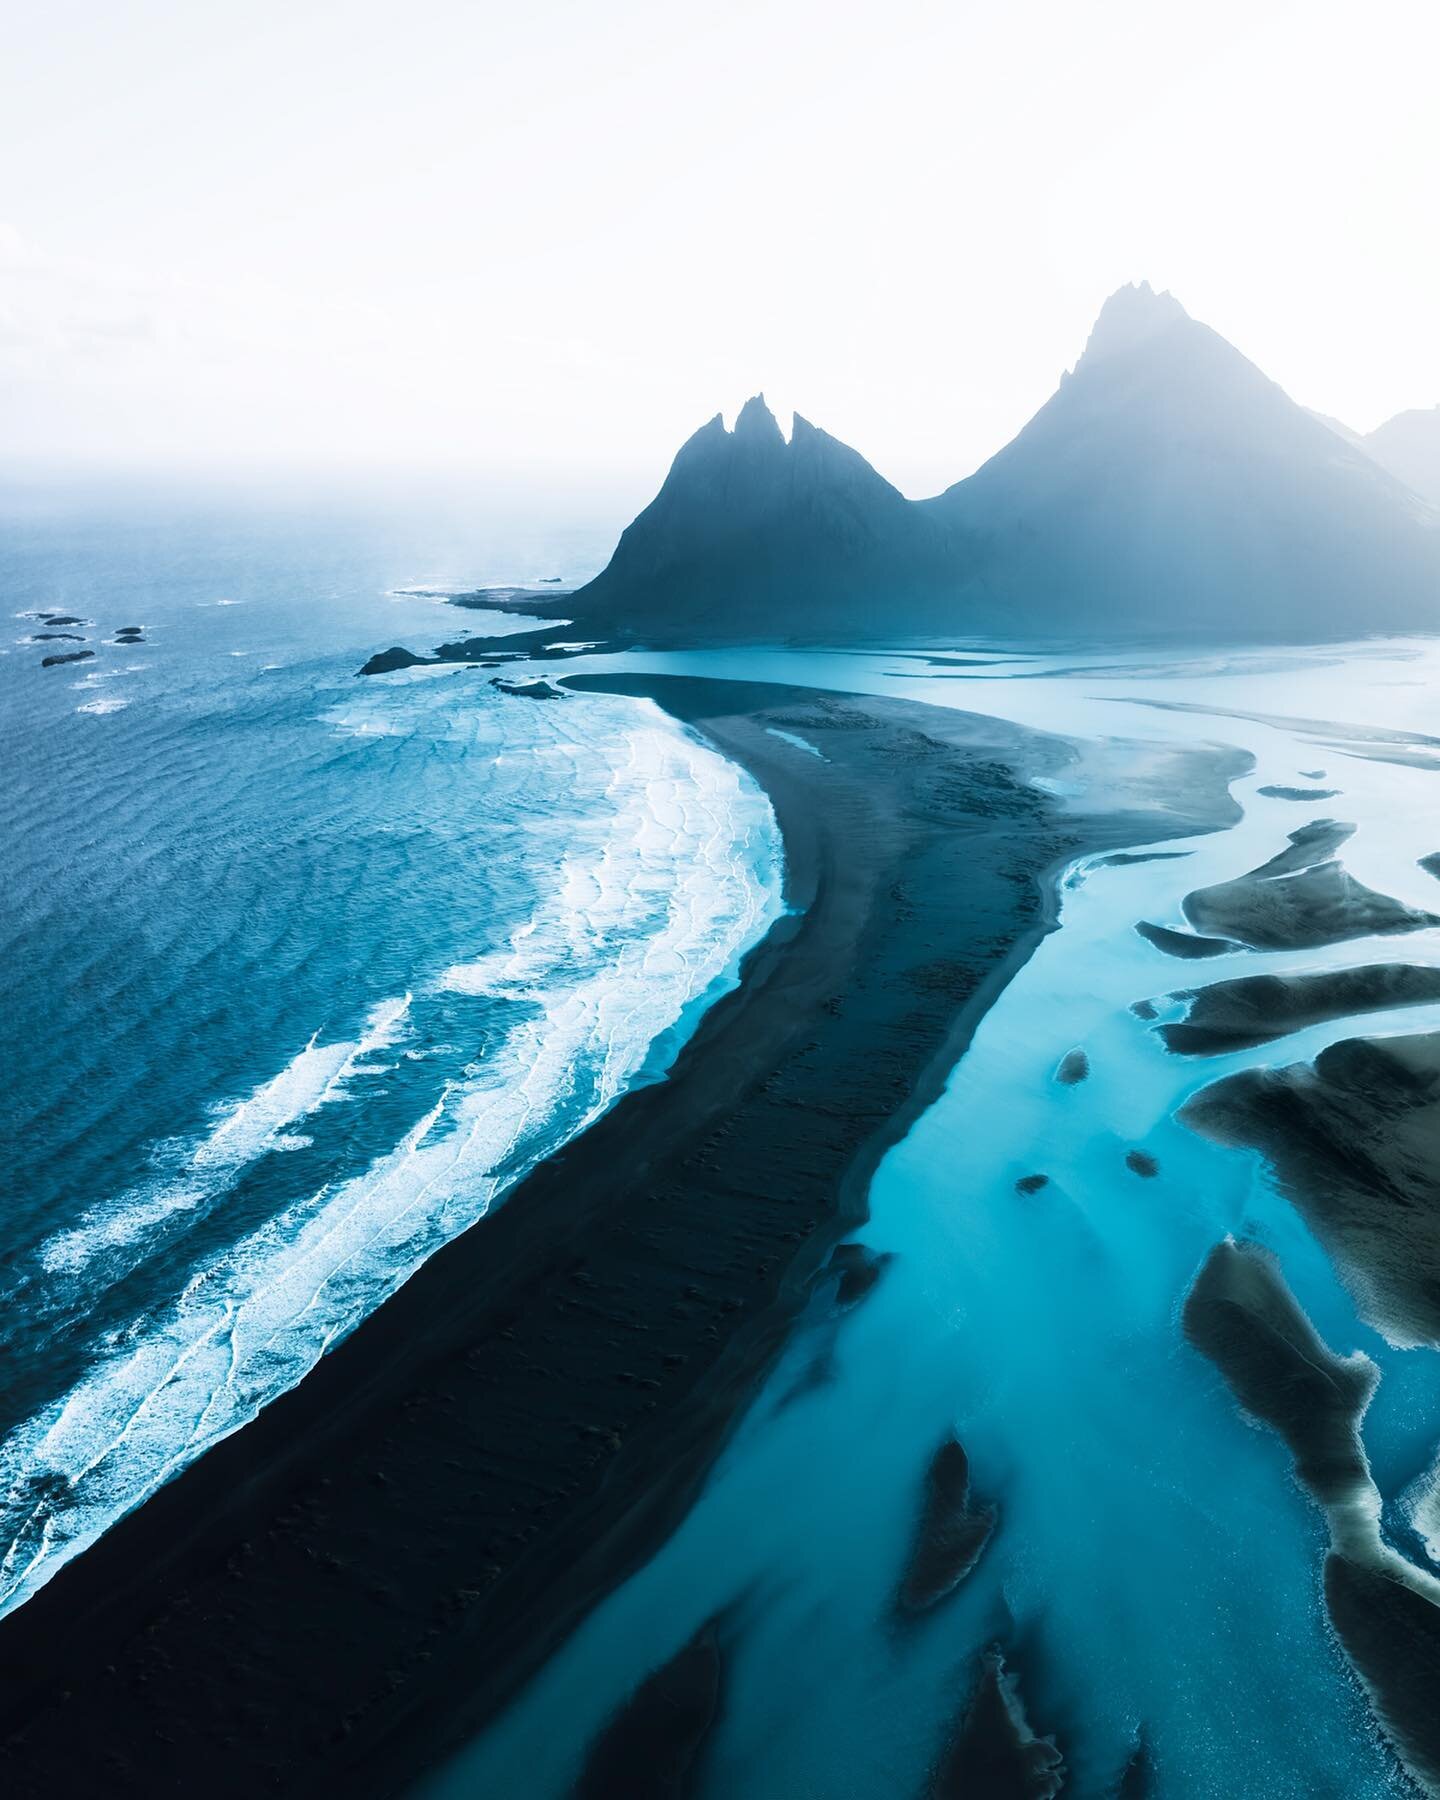 BATMAN 🦇 MOUNTAIN 

Flying high to capture all the drama from above as Vestrahorn or more affectionately, &lsquo;Batman Mountain&rsquo; commands the horizon skyline.
-
-
-
-
-
@bbcearth @photogear.nz @progearphoto @whatsoniceland @mthrworld @visuals